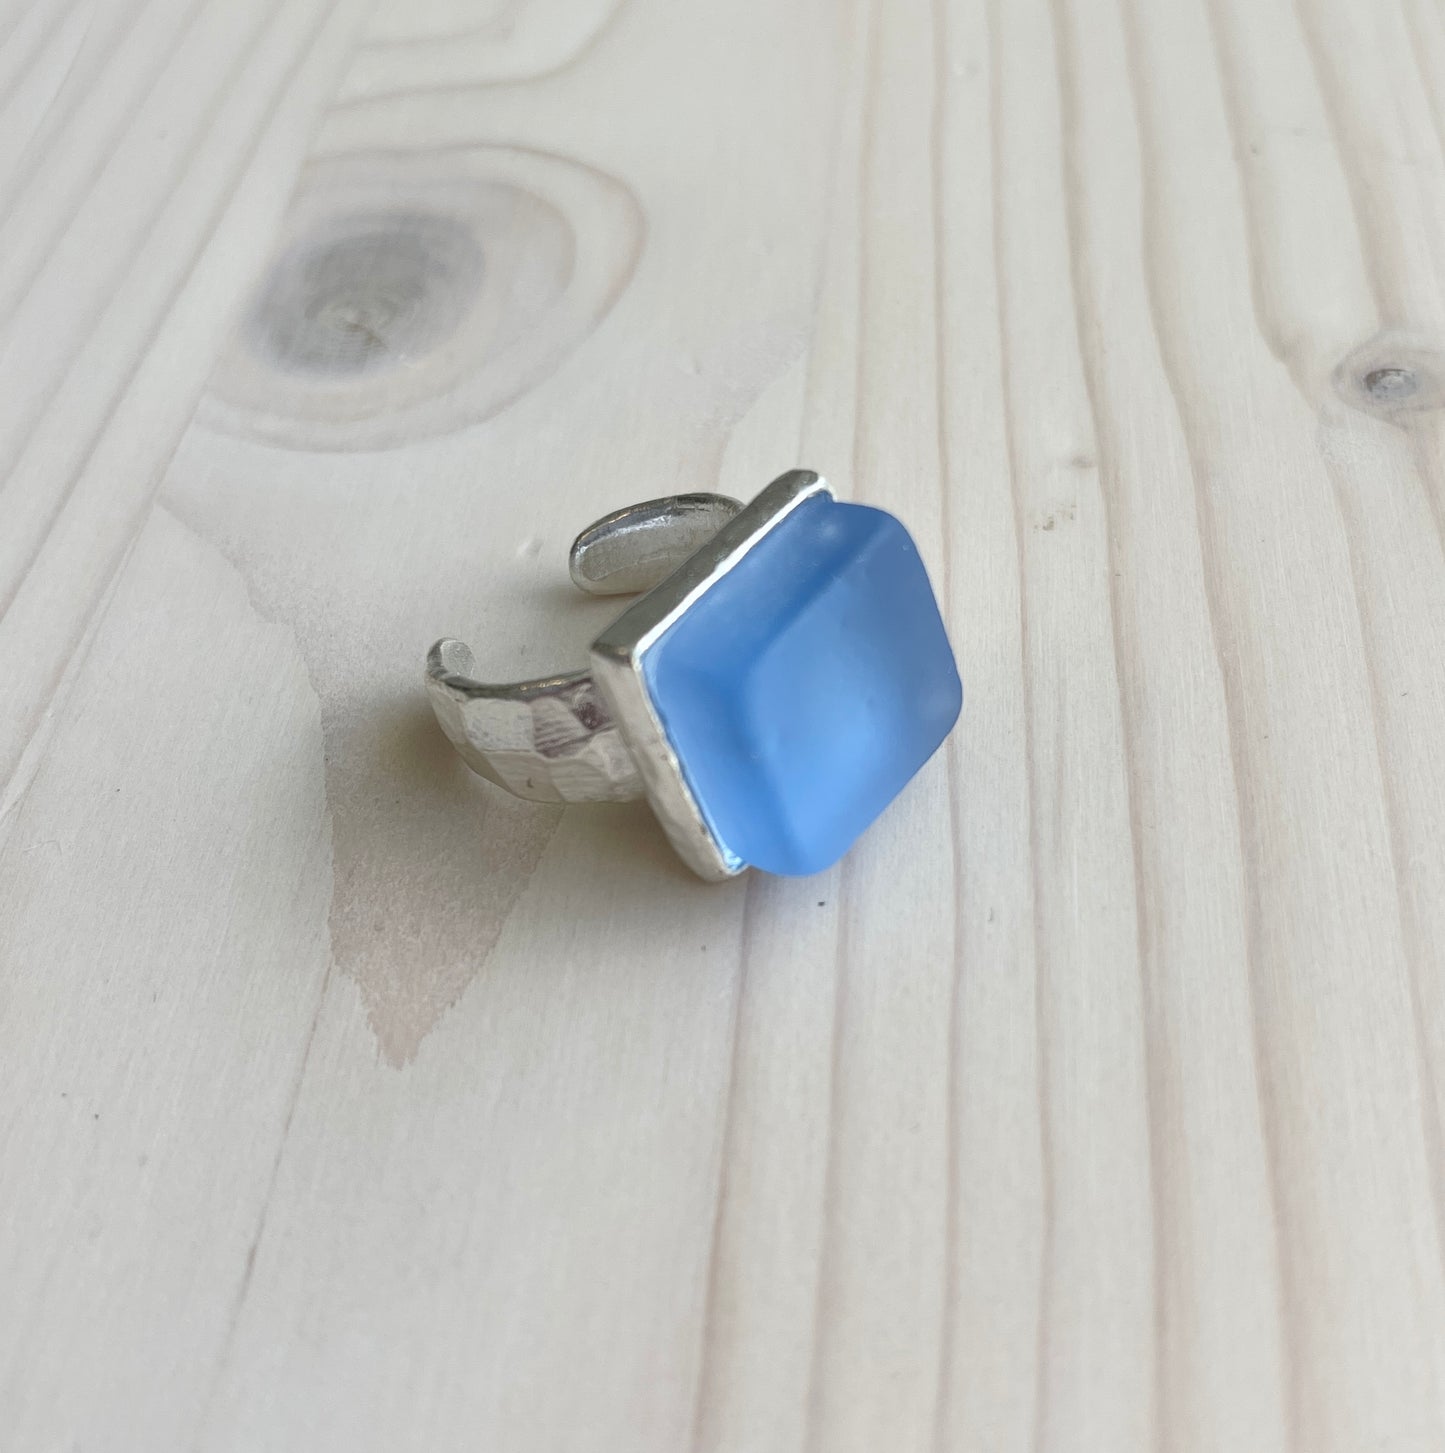 Silver Periwinkle Glass Ring Handmade in the USA.